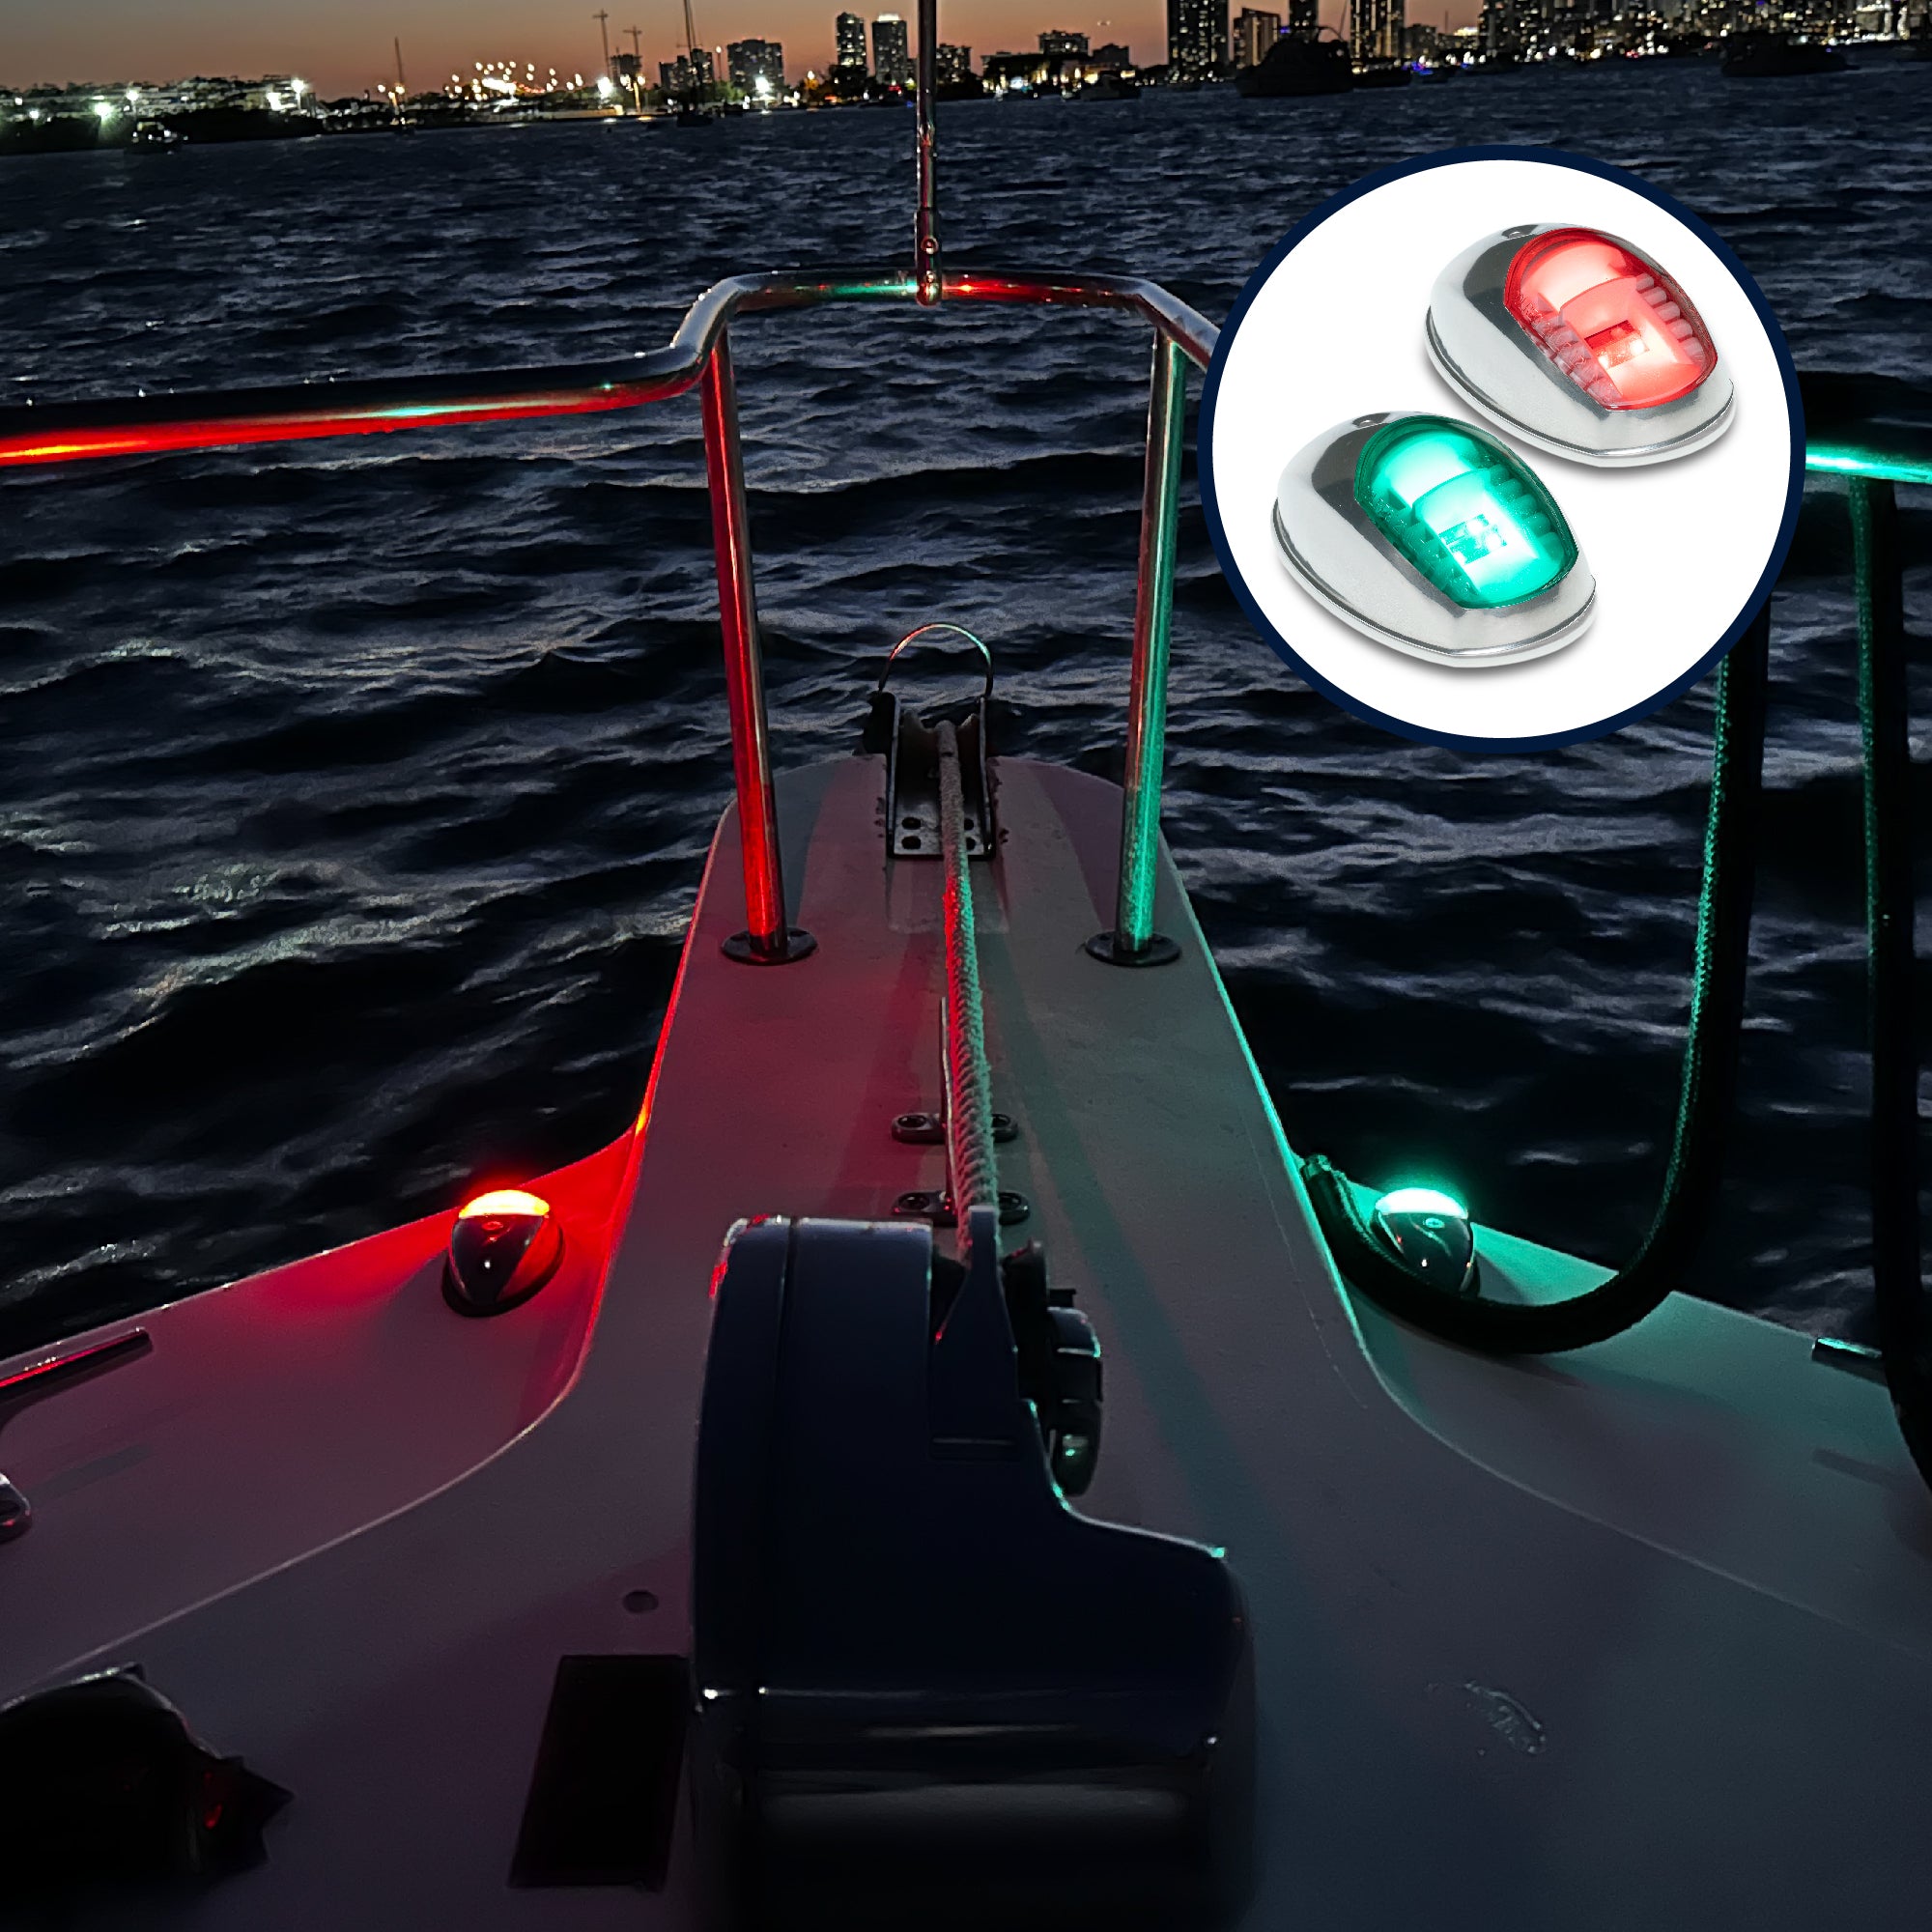 LED Side Navigation Lights, Red & Green Set, Stainless Steel Housing - FO2890